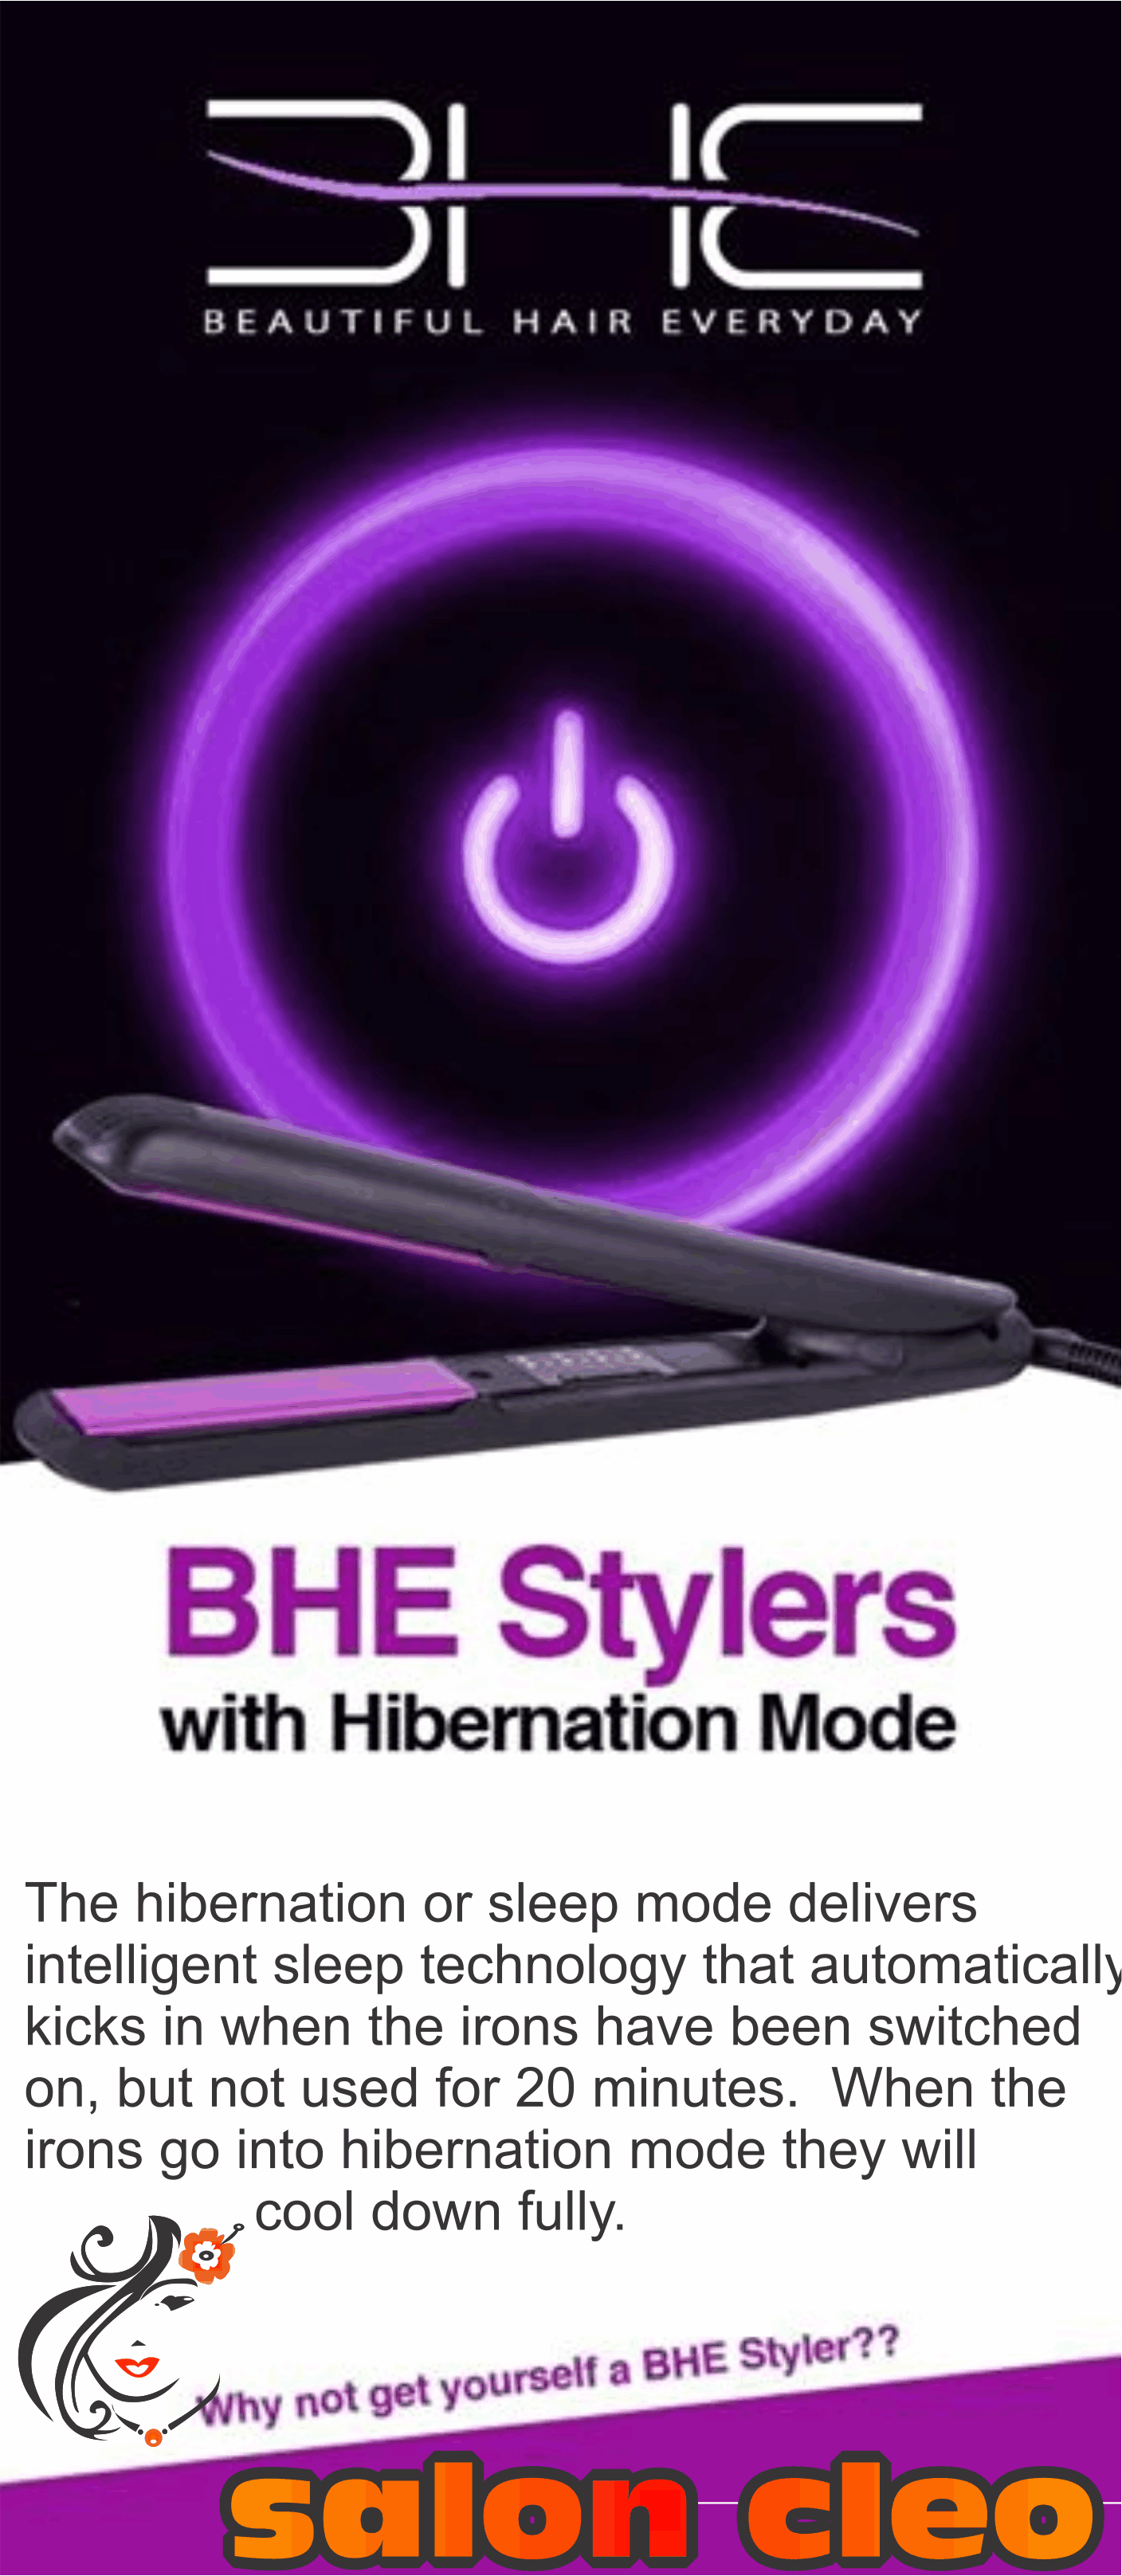 BHE HAIR IRON STRAIGHTENERS BHE HAIR IRON AGENT IN KZN SALON CLEO 0315002353 THE FOR BEST DEAL FOR CHEAPEST DEAL IN BHE BEAUTIFUL HAIR EVERYDAY  0315002353 BHE WIDE THICK PLATE BHE THIN NARRARO PLATE HAIR IRON